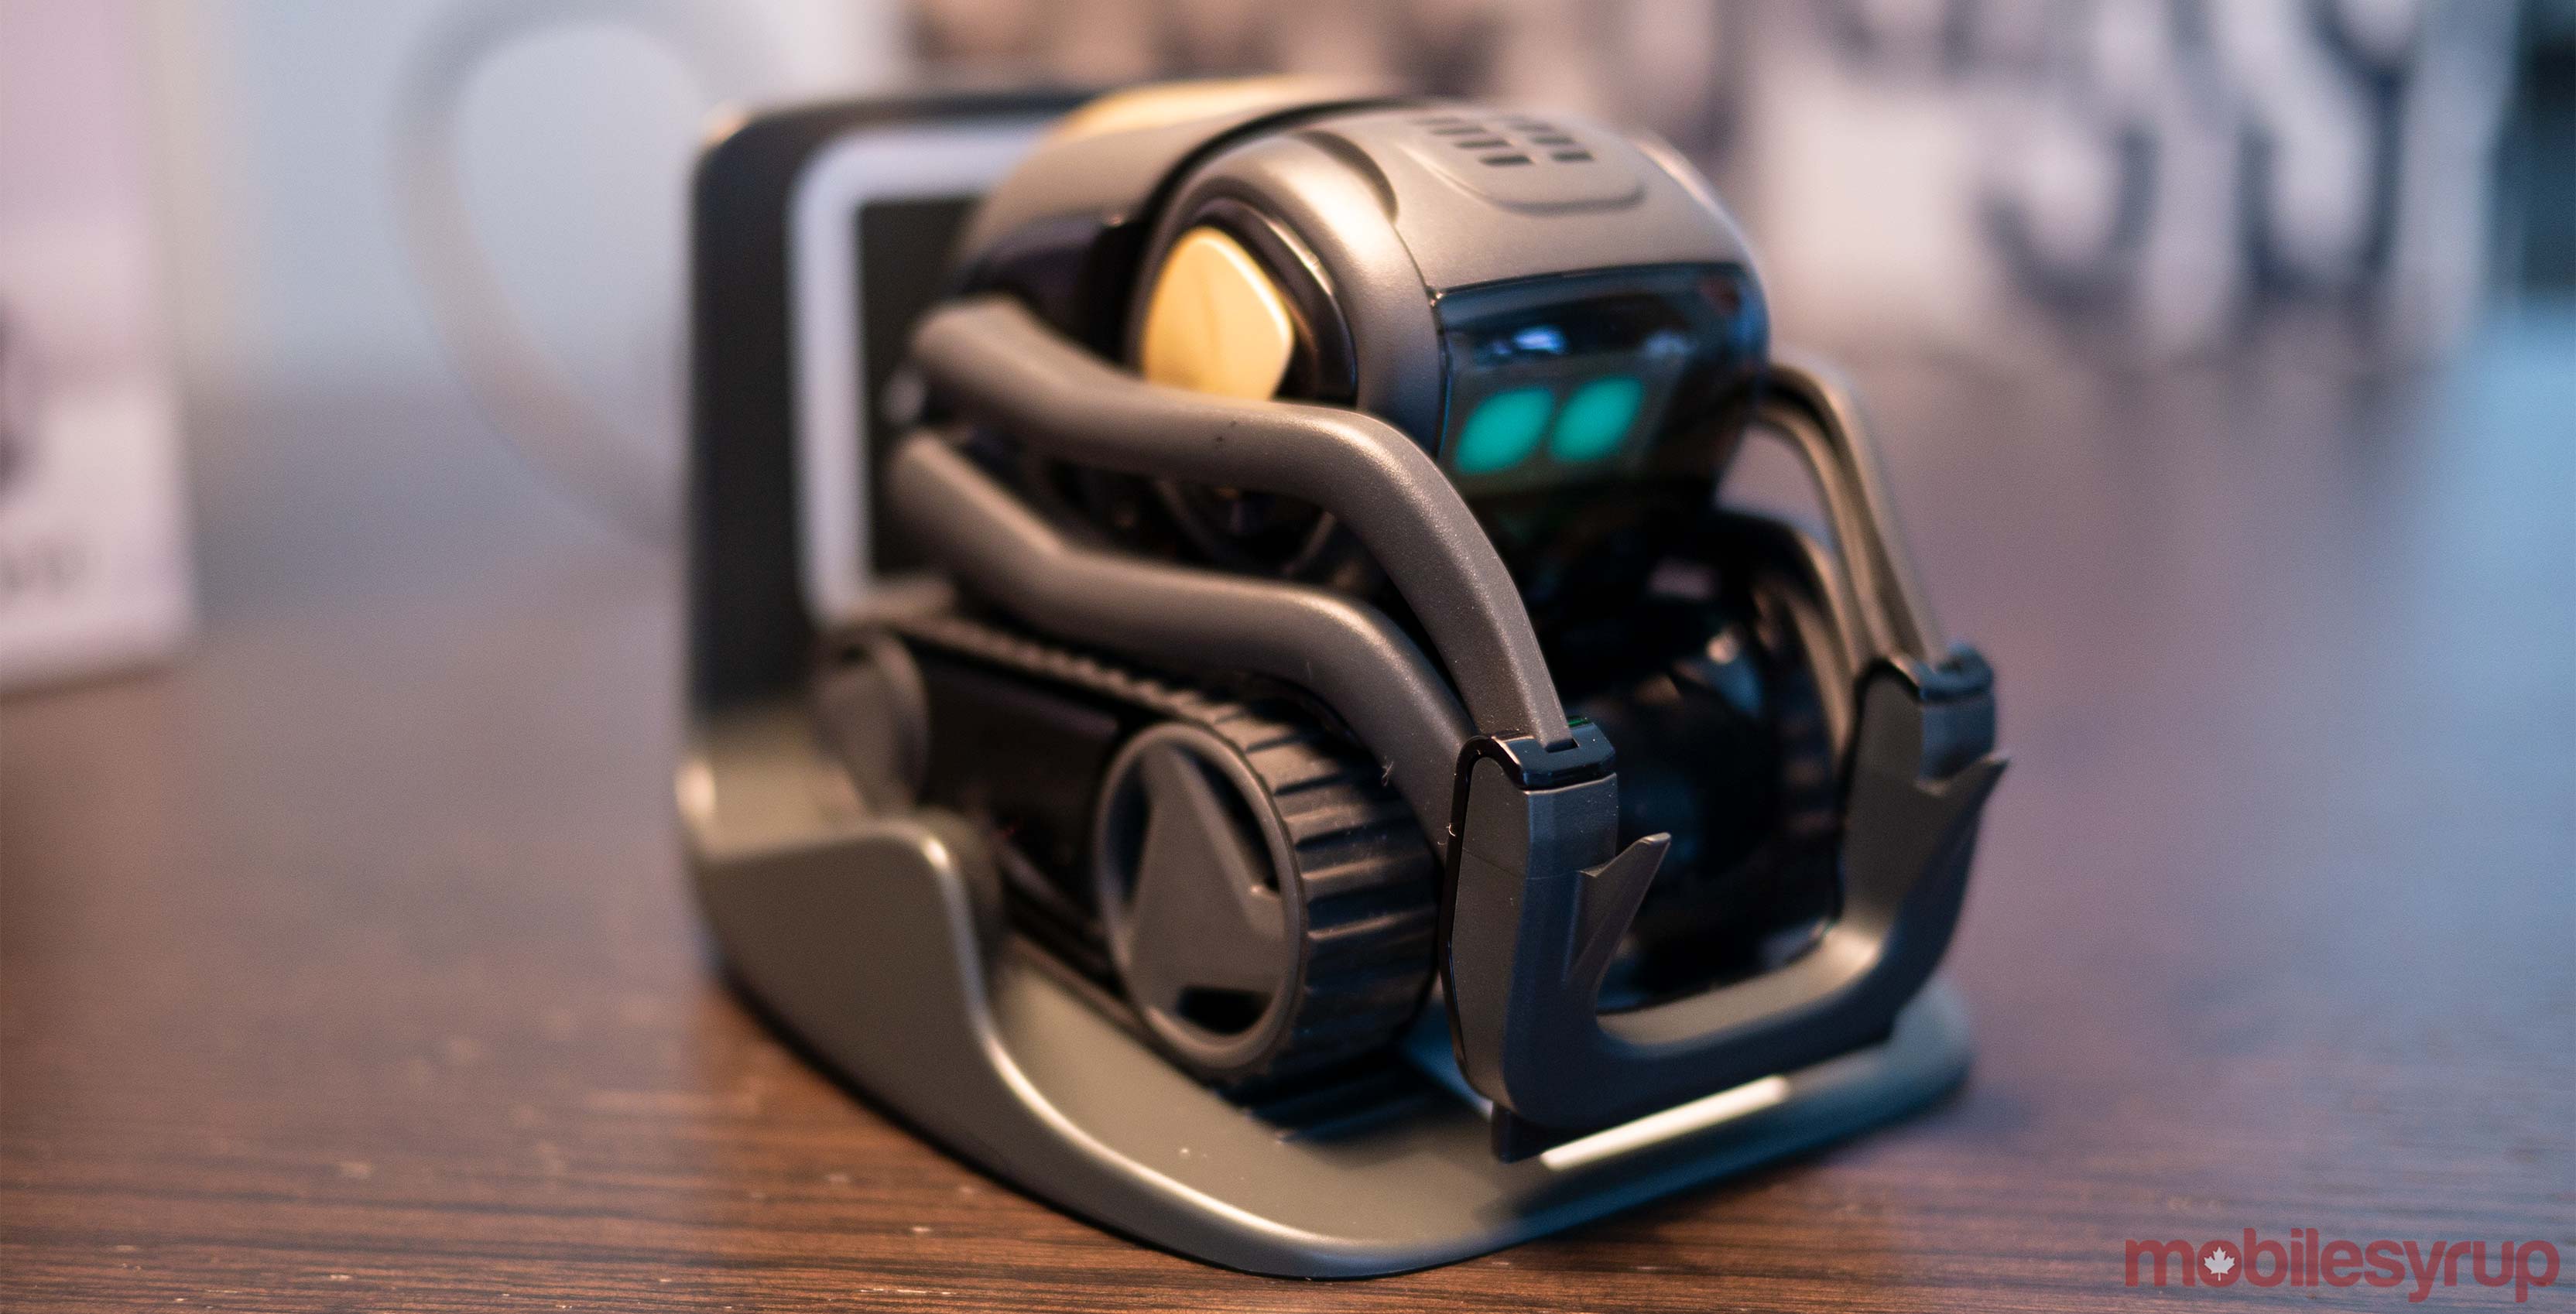 Anki's new Vector robot just wants to hang out with you